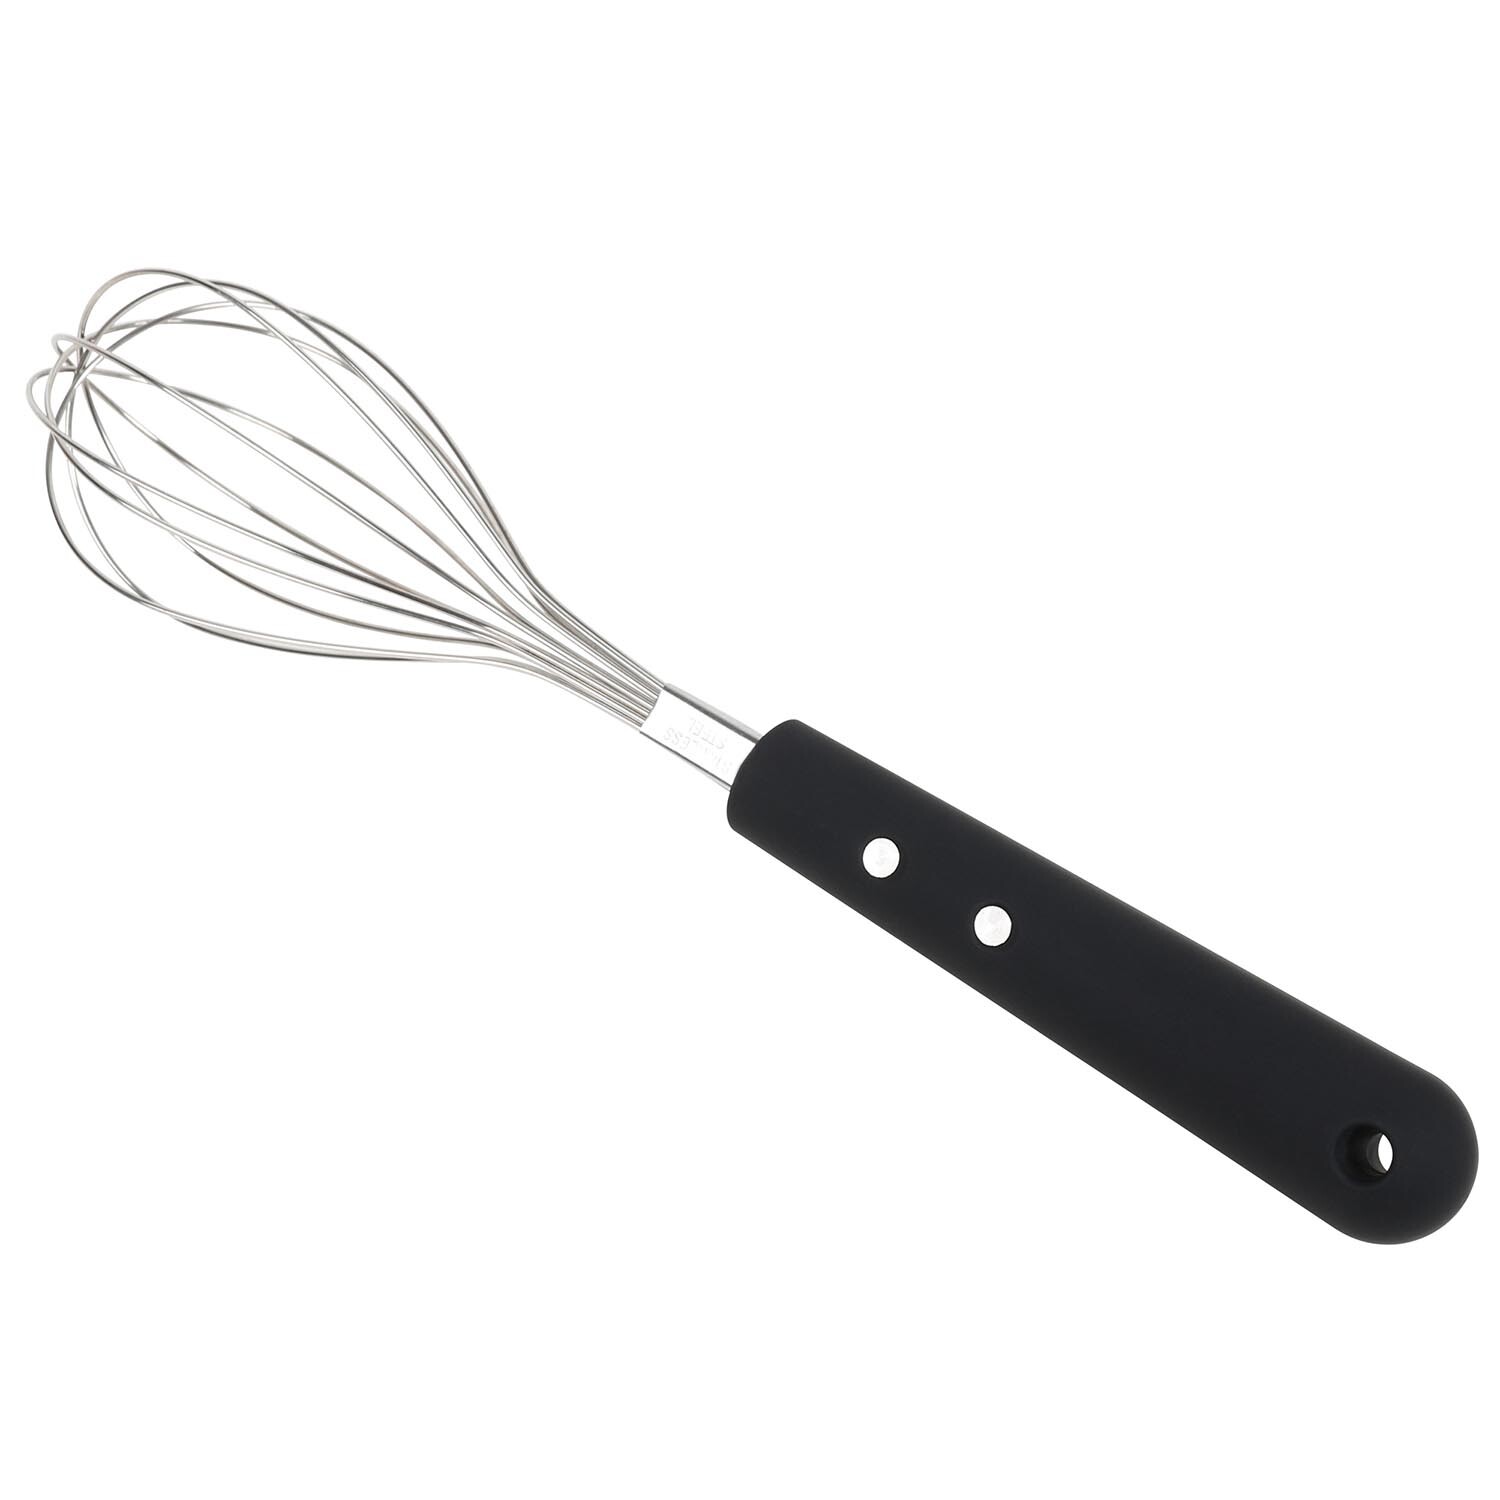 Kitchenmaster Whisk with Soft Touch Handle - Black Image 7